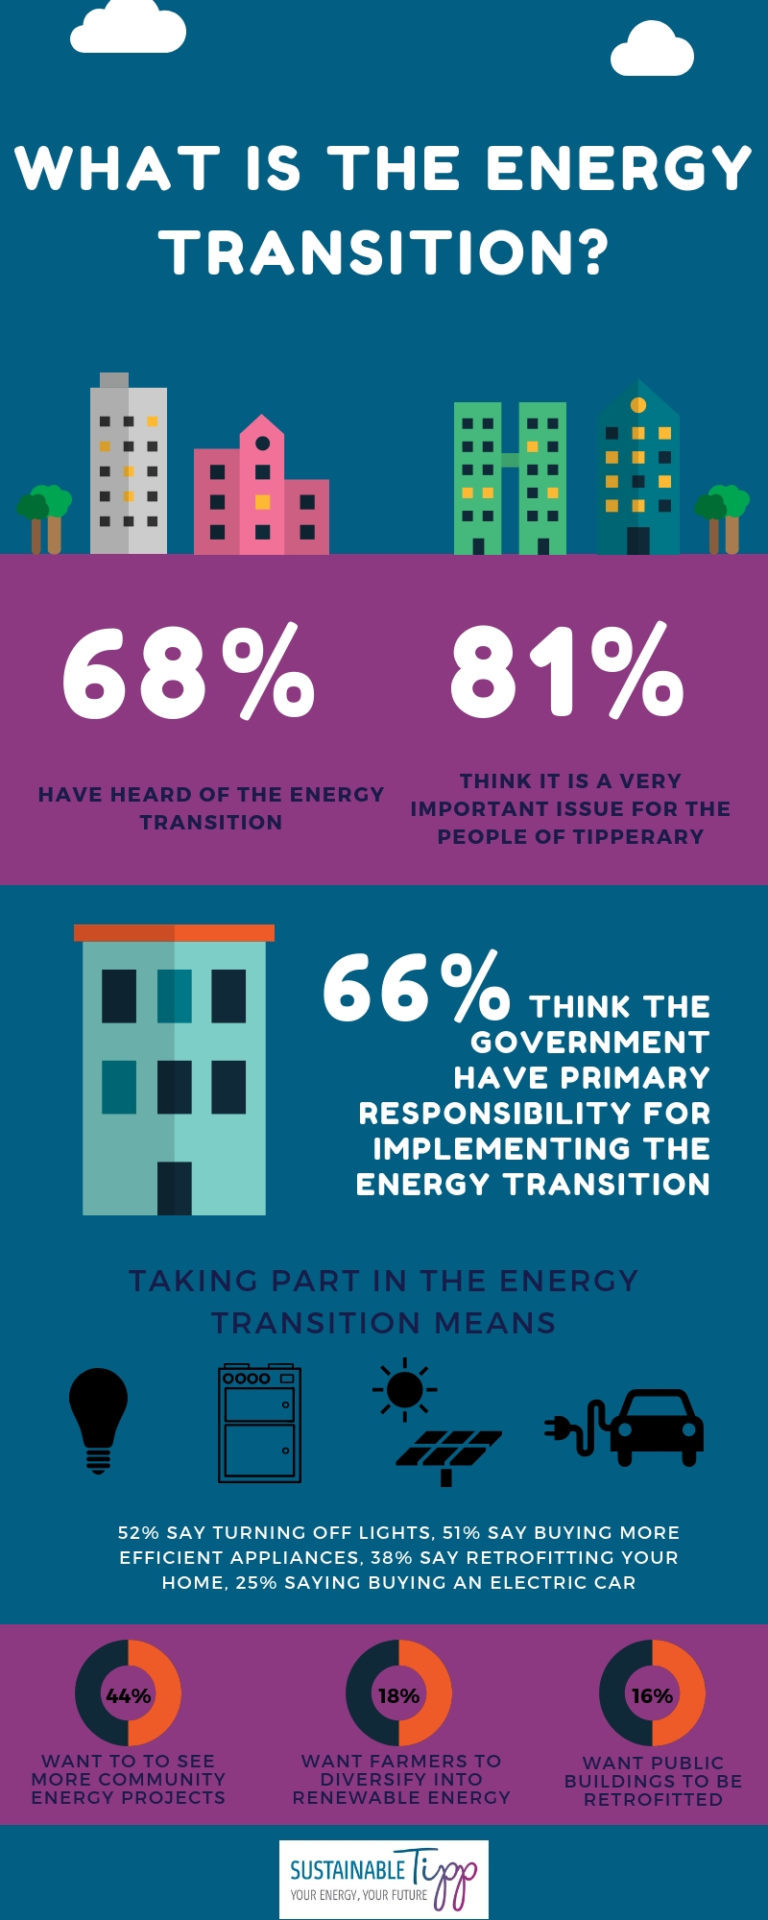 Energy Transition Sustainable Tipp